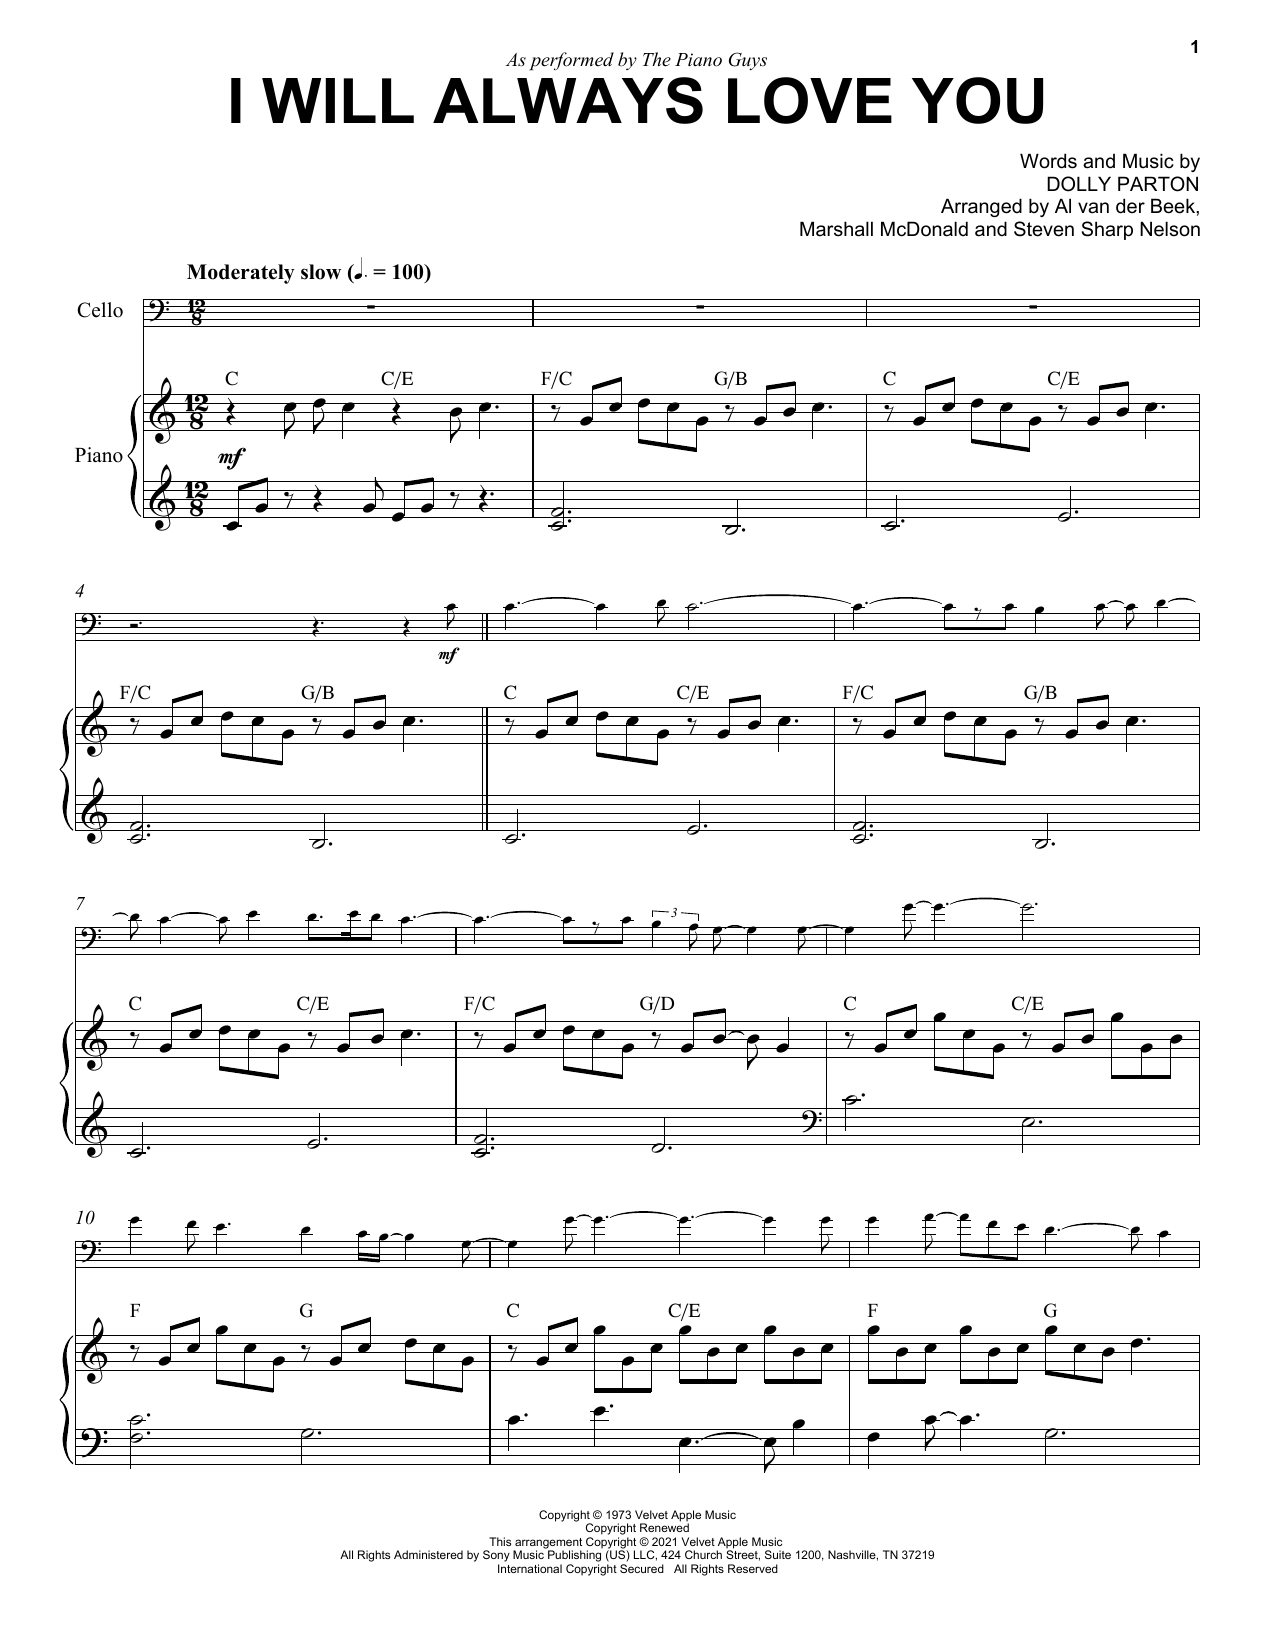 Download The Piano Guys I Will Always Love You Sheet Music